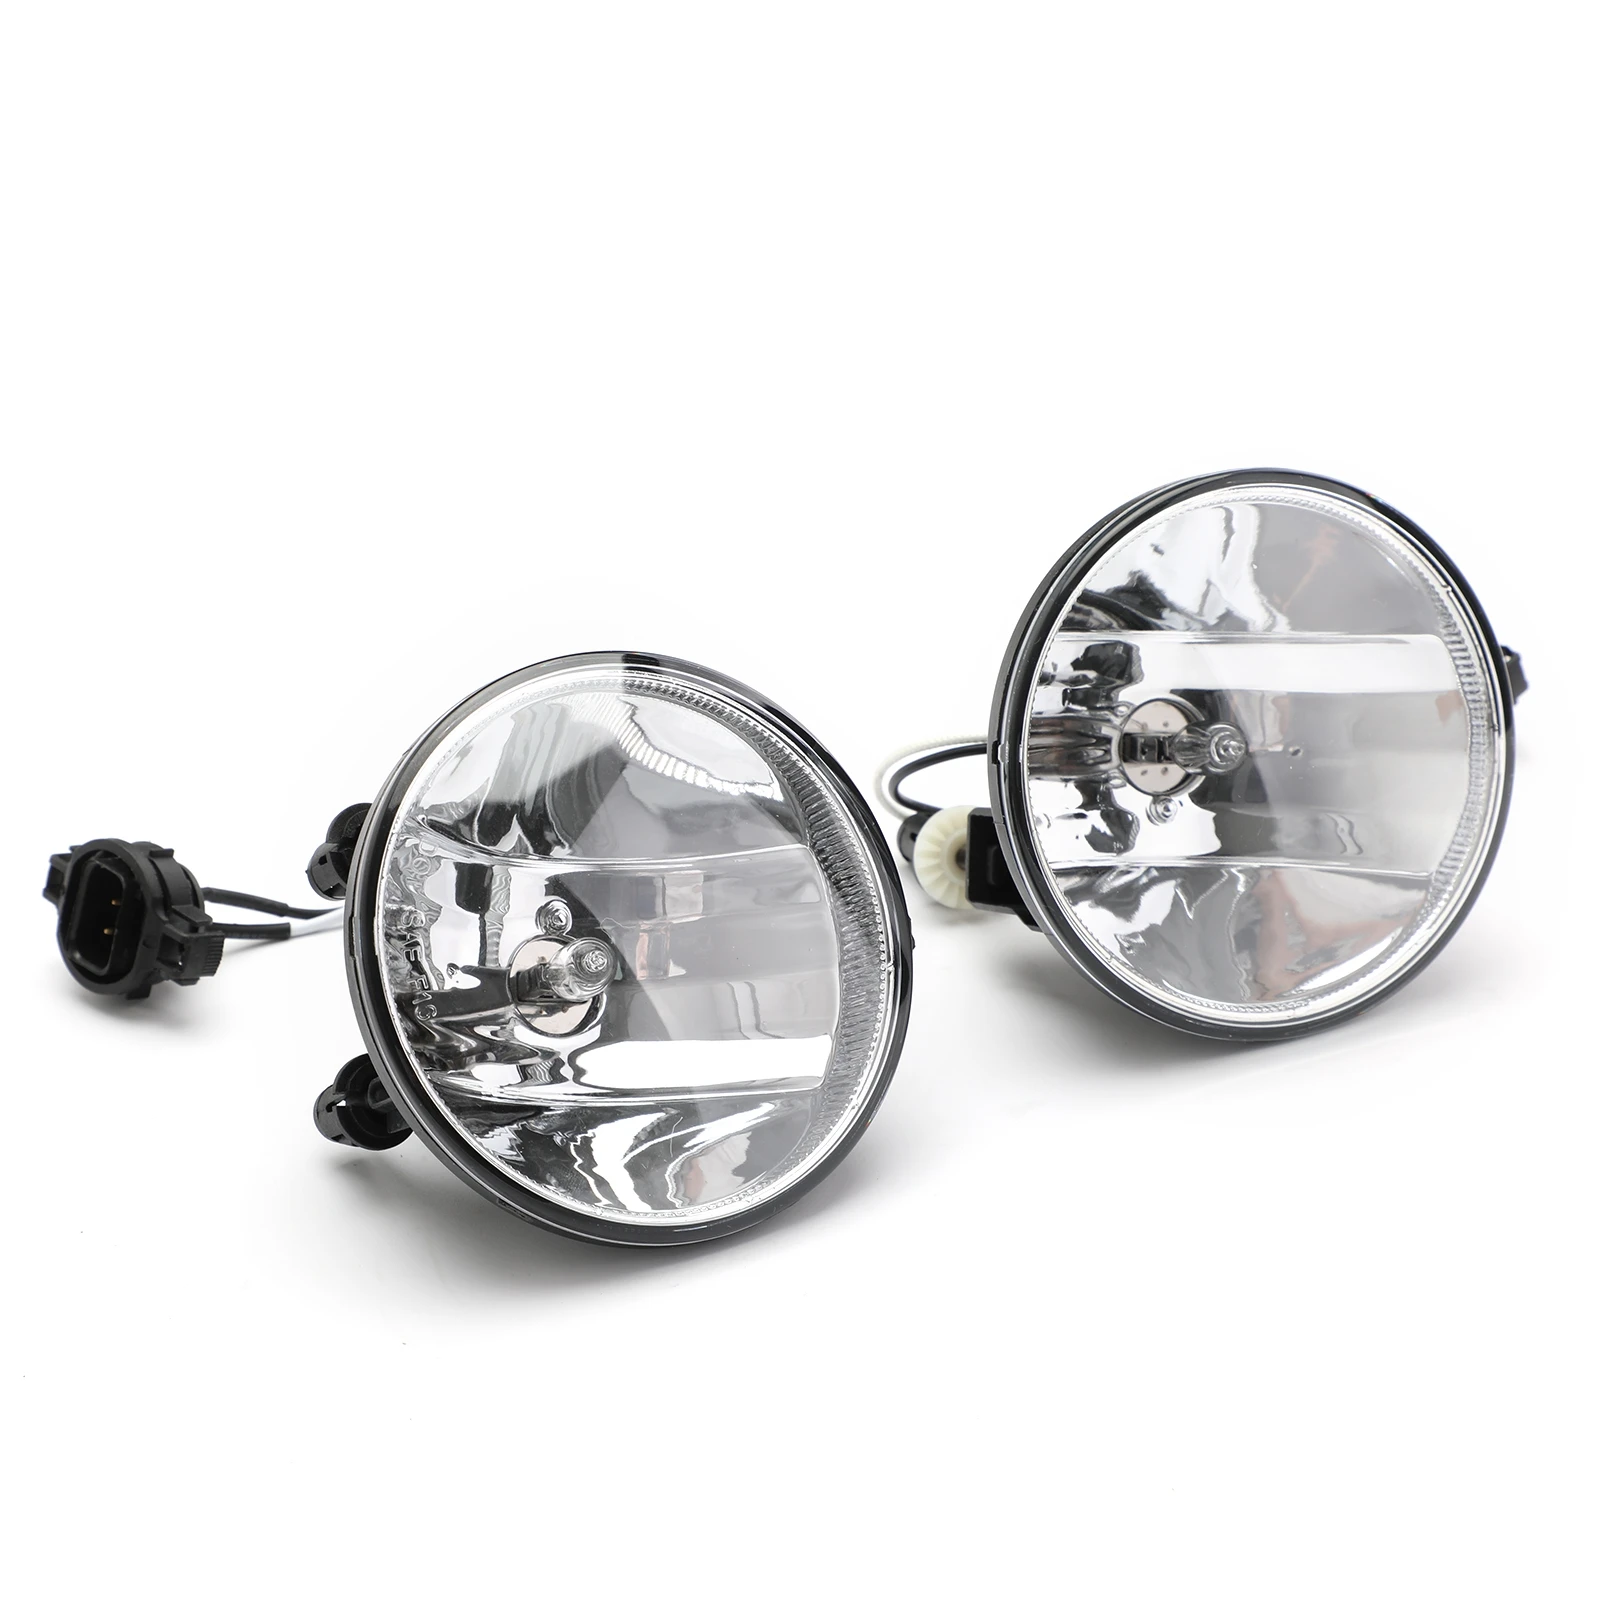 

Areyourshop Pair Fog Light Clear Lens Front Lamps Kit For Chevy Camaro 2010 2011 2012 2013, Black